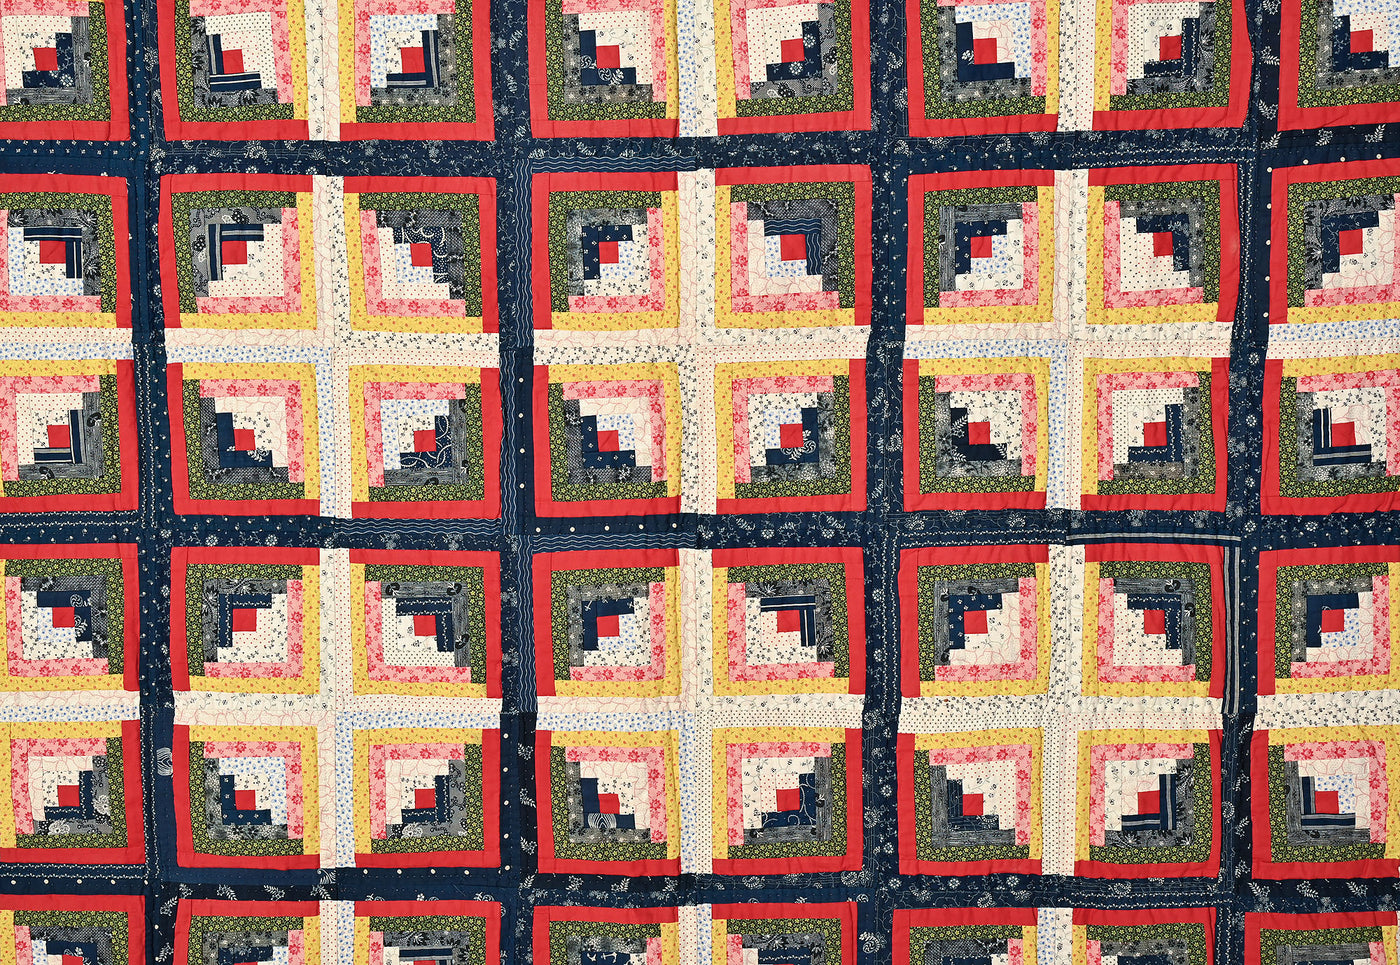 Light and Dark Calico Log Cabin Quilt